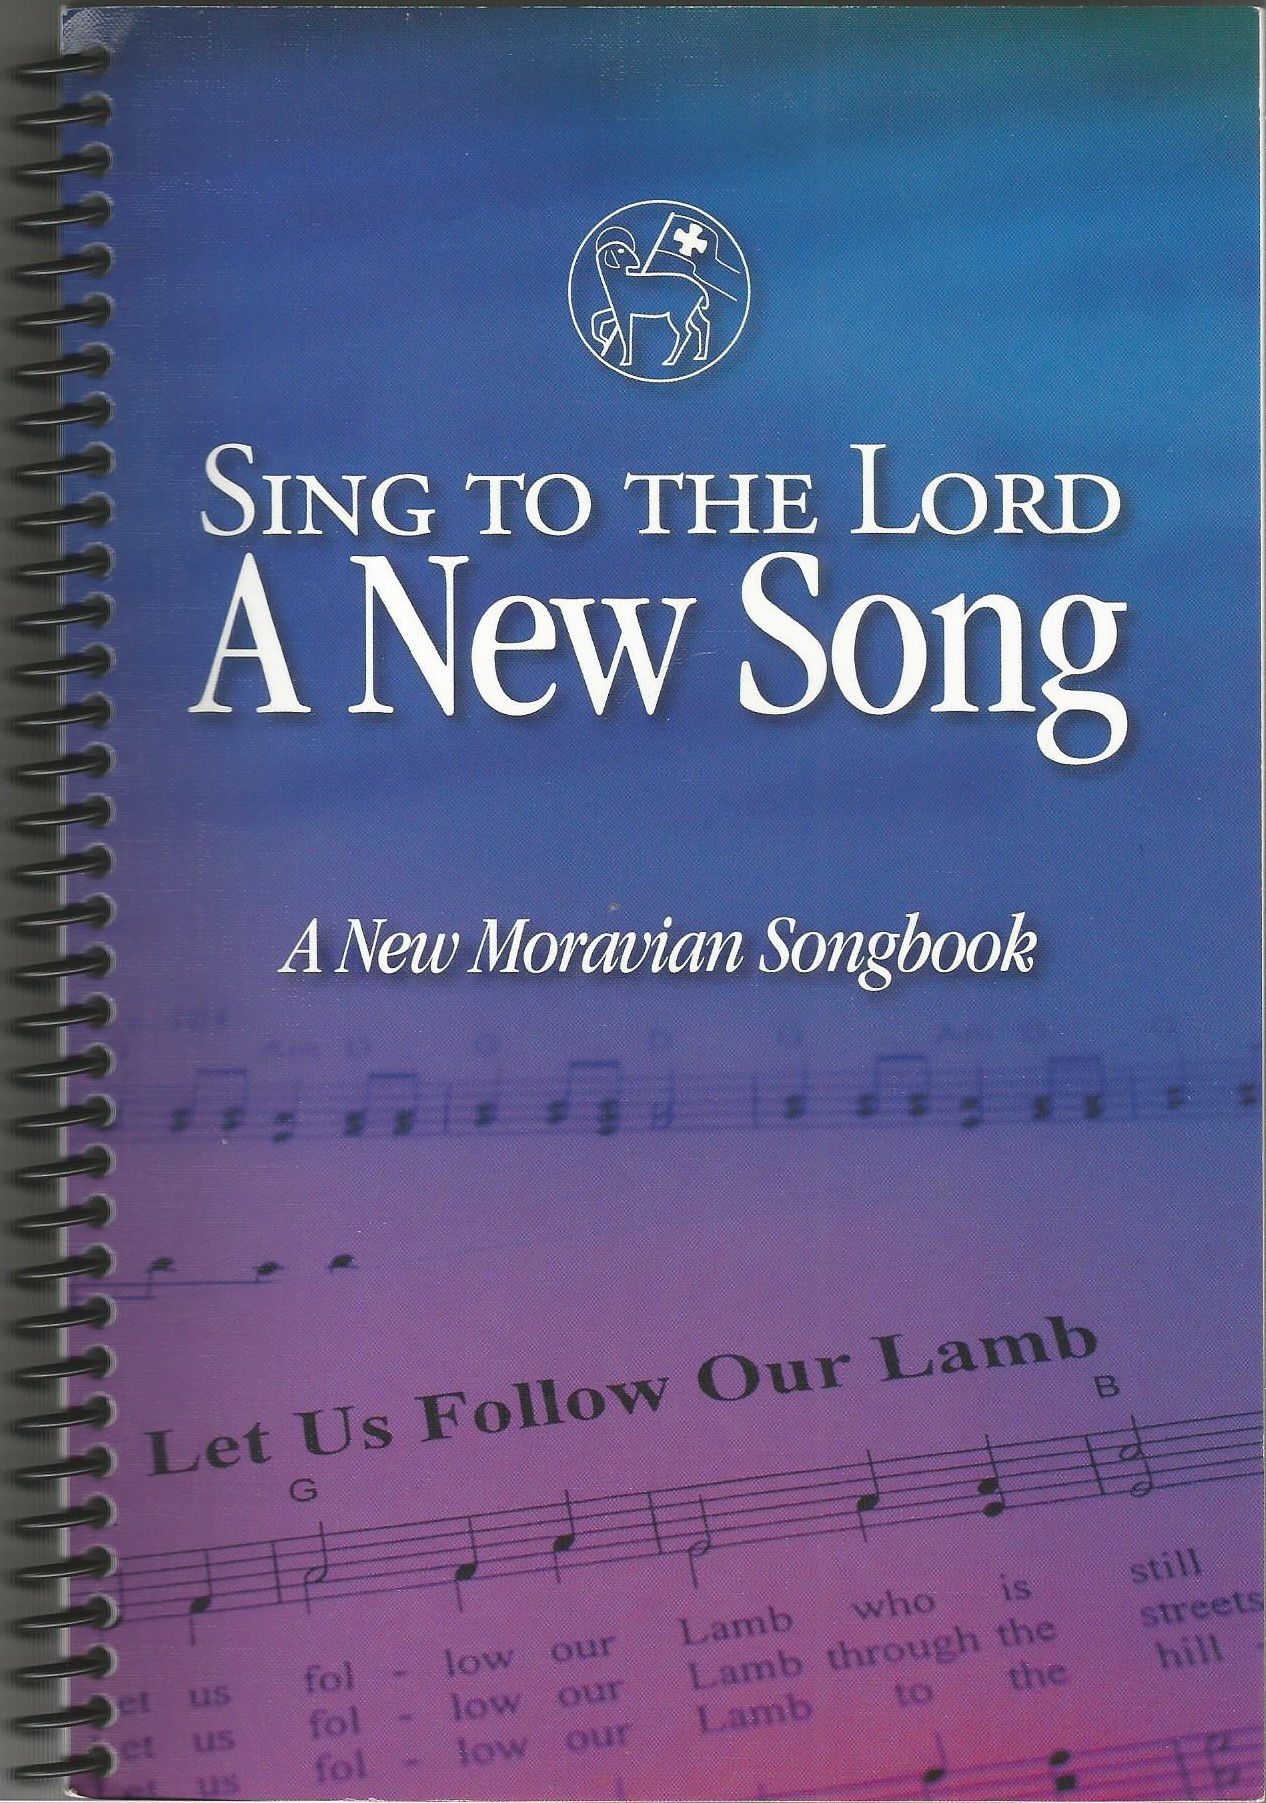 Sing to the Lord a New Song (2013)